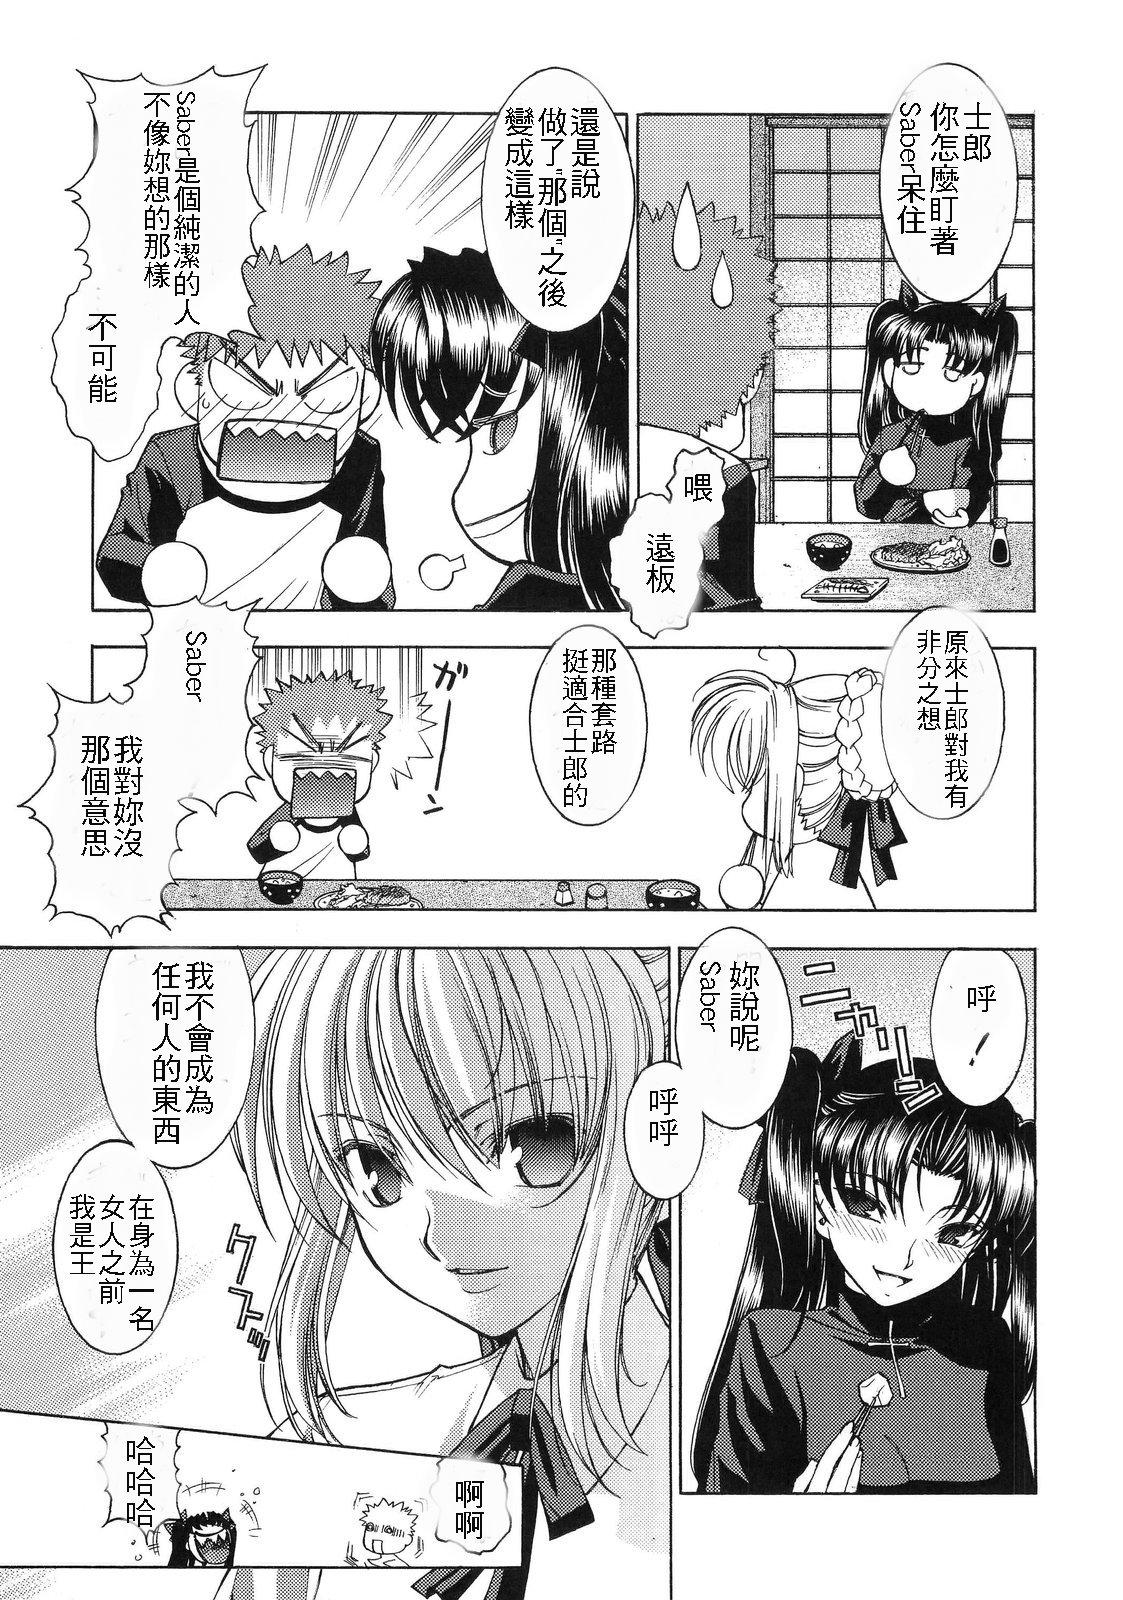 Farting Atomic-S - Fate stay night Pissing - Page 4